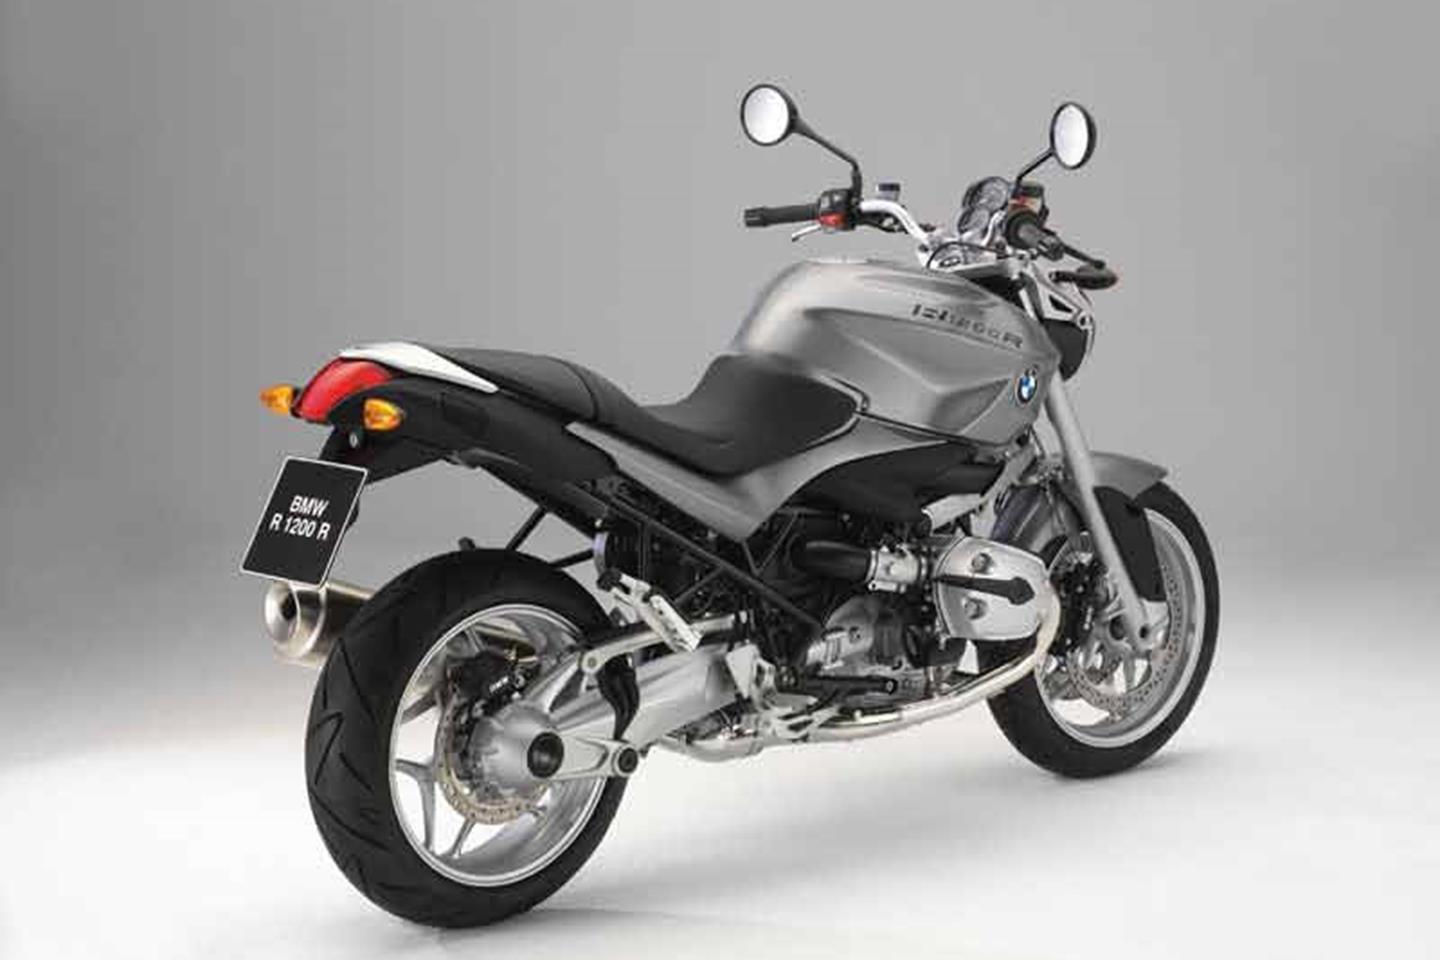 BMW R1200R (2006-2014) Review | Owner & Expert Ratings